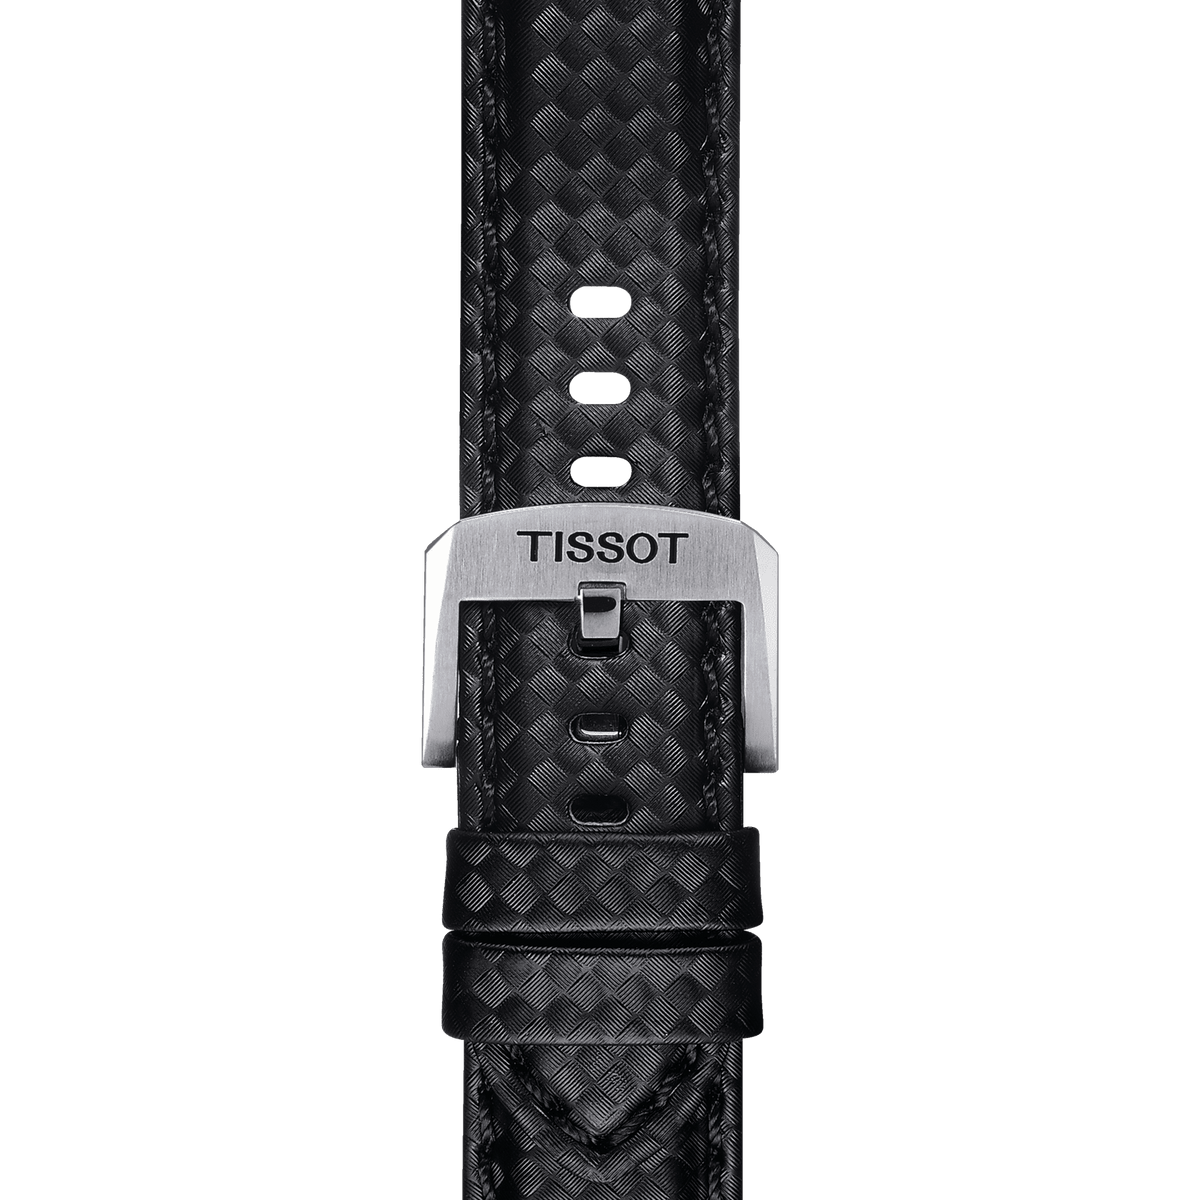 TISSOT OFFICIAL BLACK FABRIC STRAP LUGS 20 MM